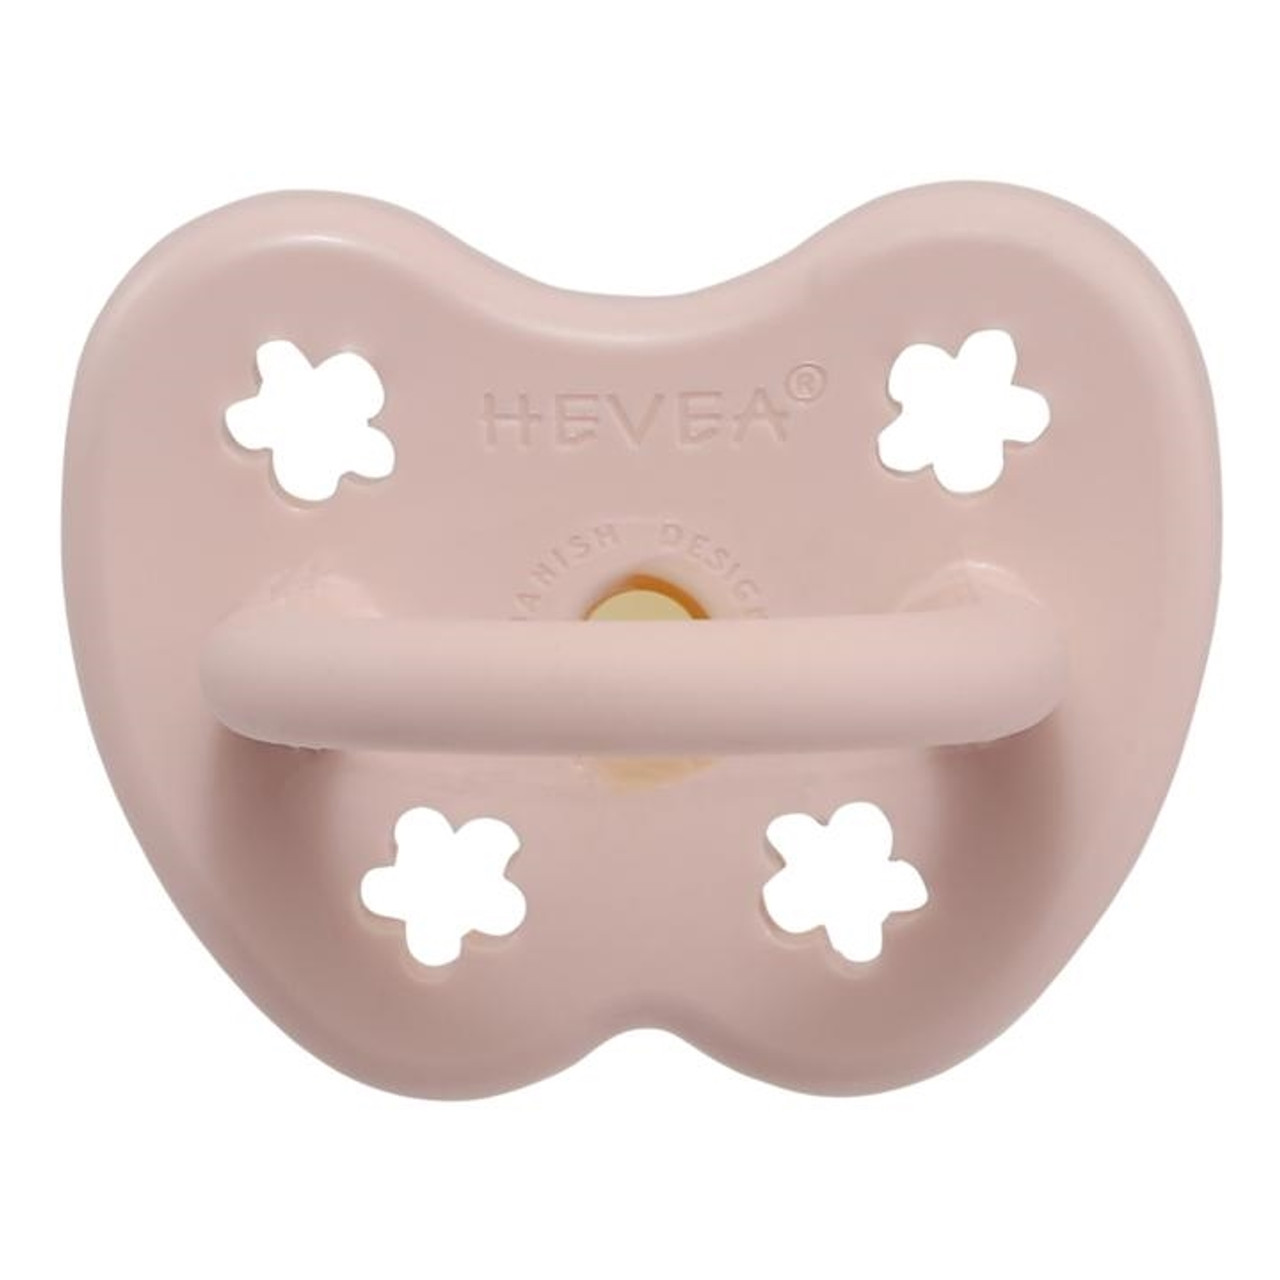 Natural Rubber Pacifier - Orthodontic, Pink Flowers, 0-3M